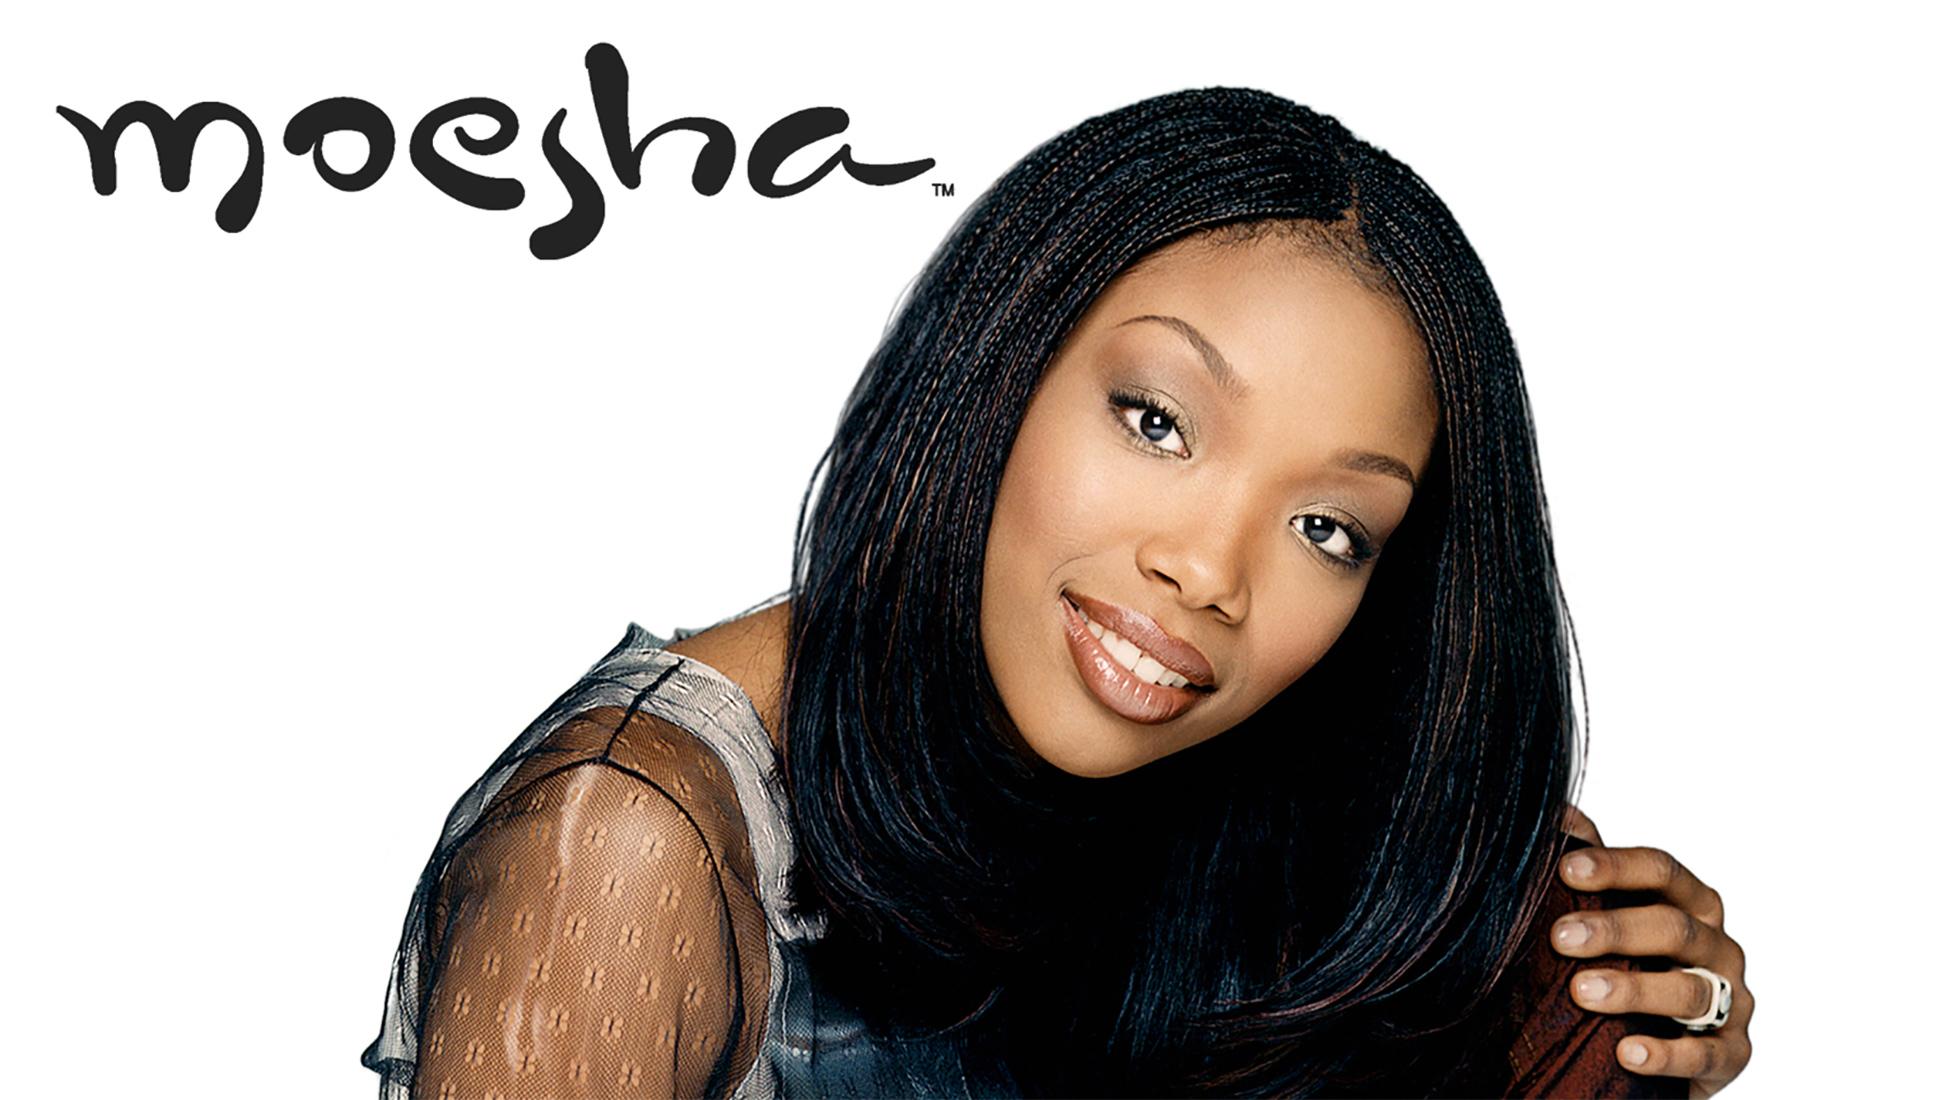 Stream And Watch Moesha Online Sling Tv Moesha is an american sitcom that ran on upn from january 23, 1996 through may 14, 2001, starring r&b singer brandy norwood. sling tv